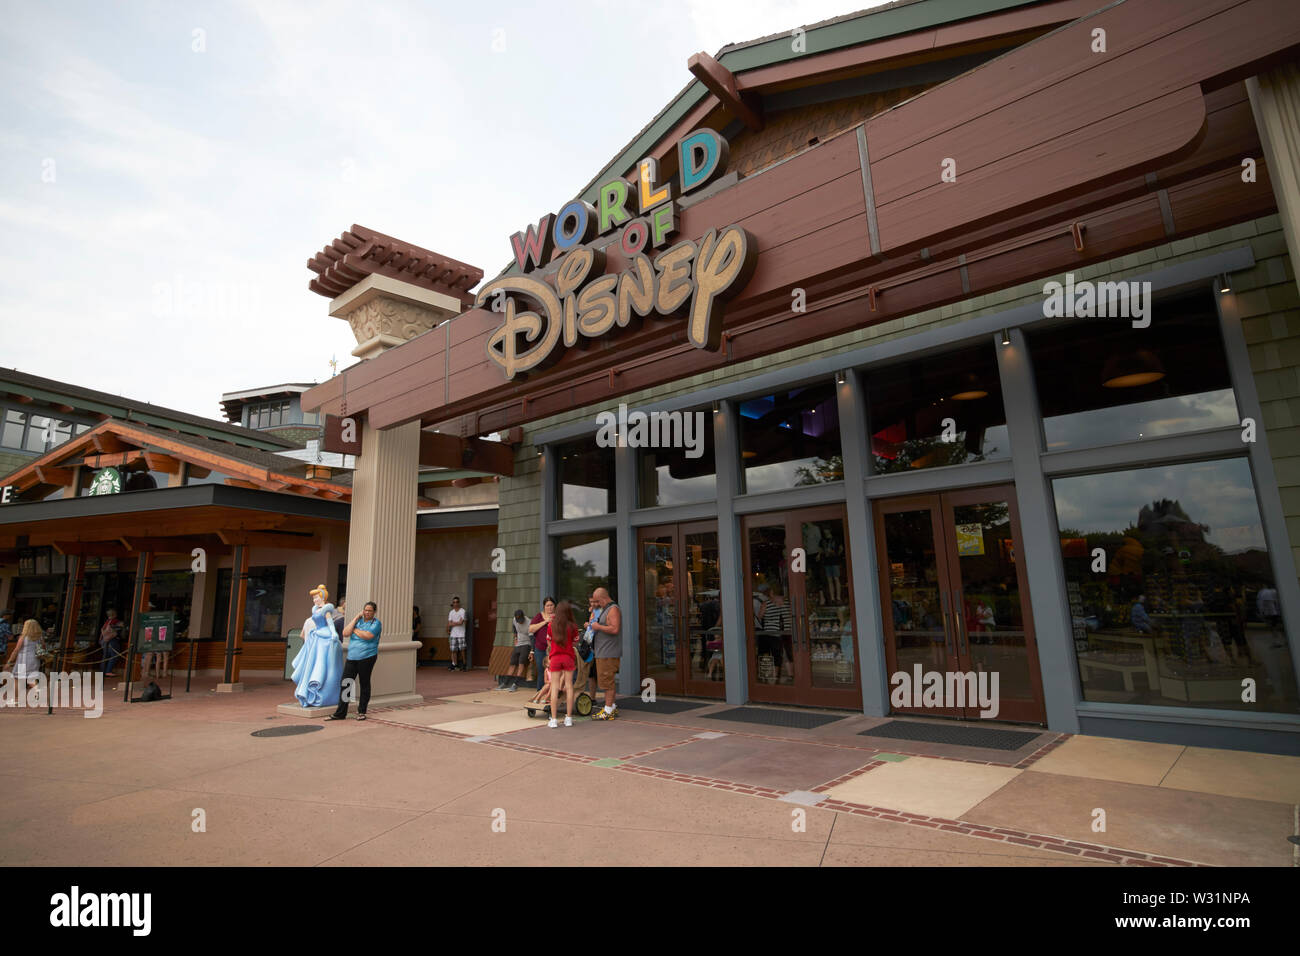 world of disney store at disney springs outdoor shopping and dining area orlando florida USA United States of America Stock Photo